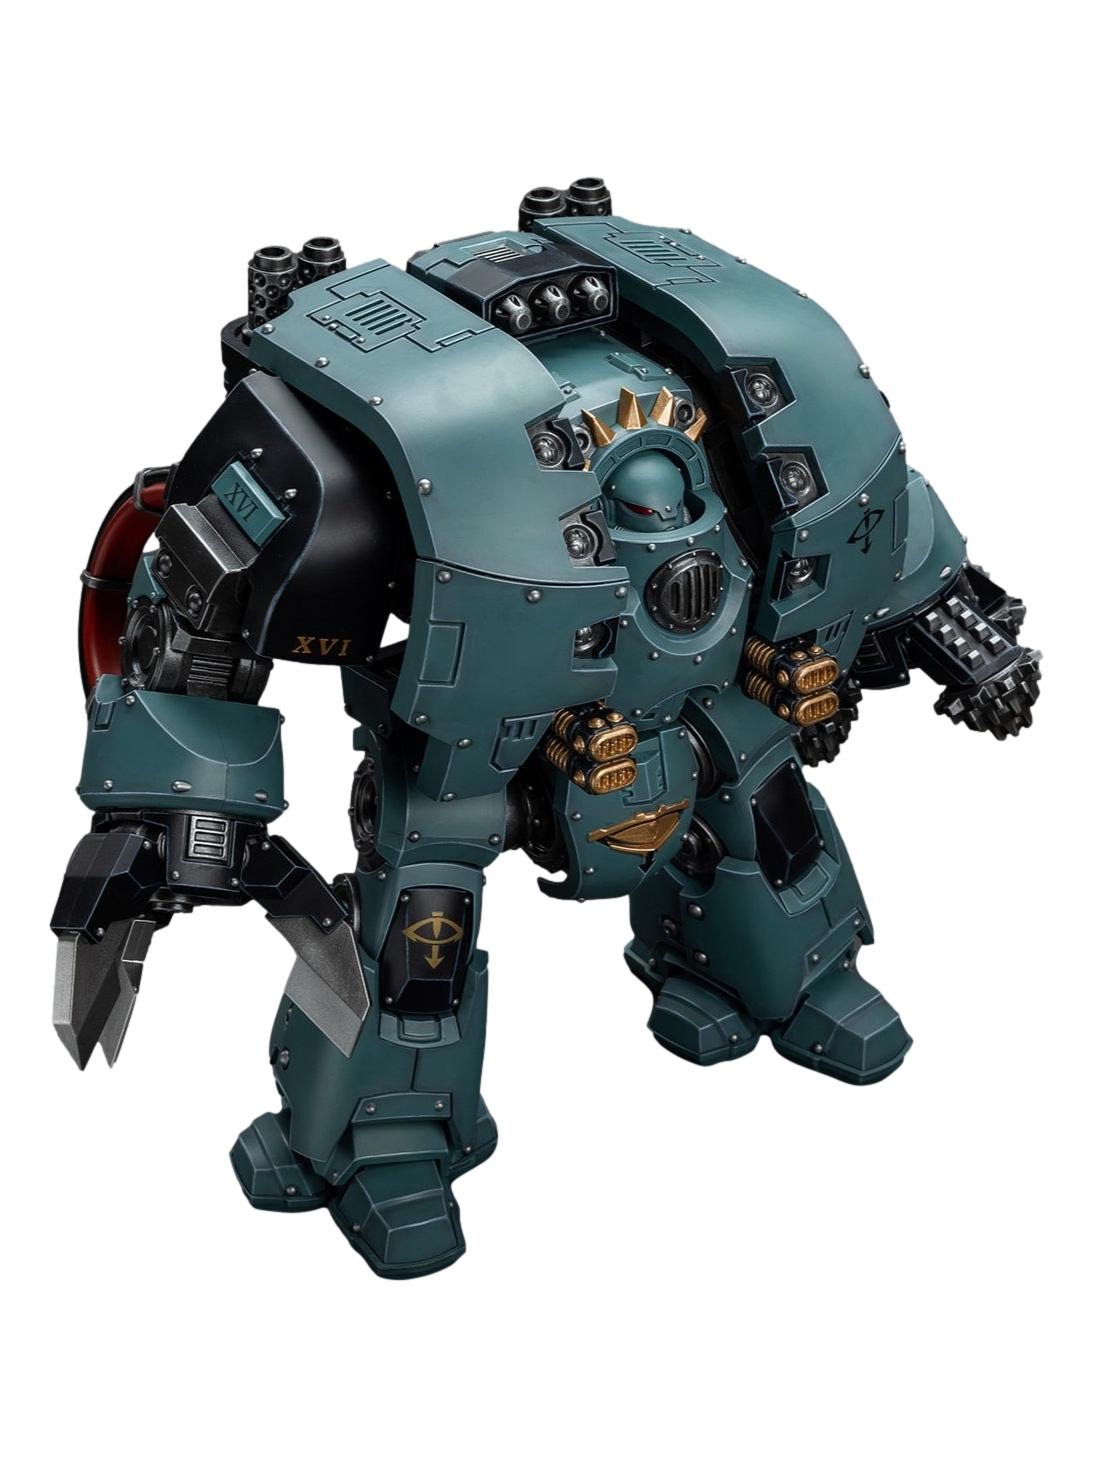 Warhammer The Horus Heresy: Sons of Horus Leviathan Dreadnought with Siege Drills Joy Toy